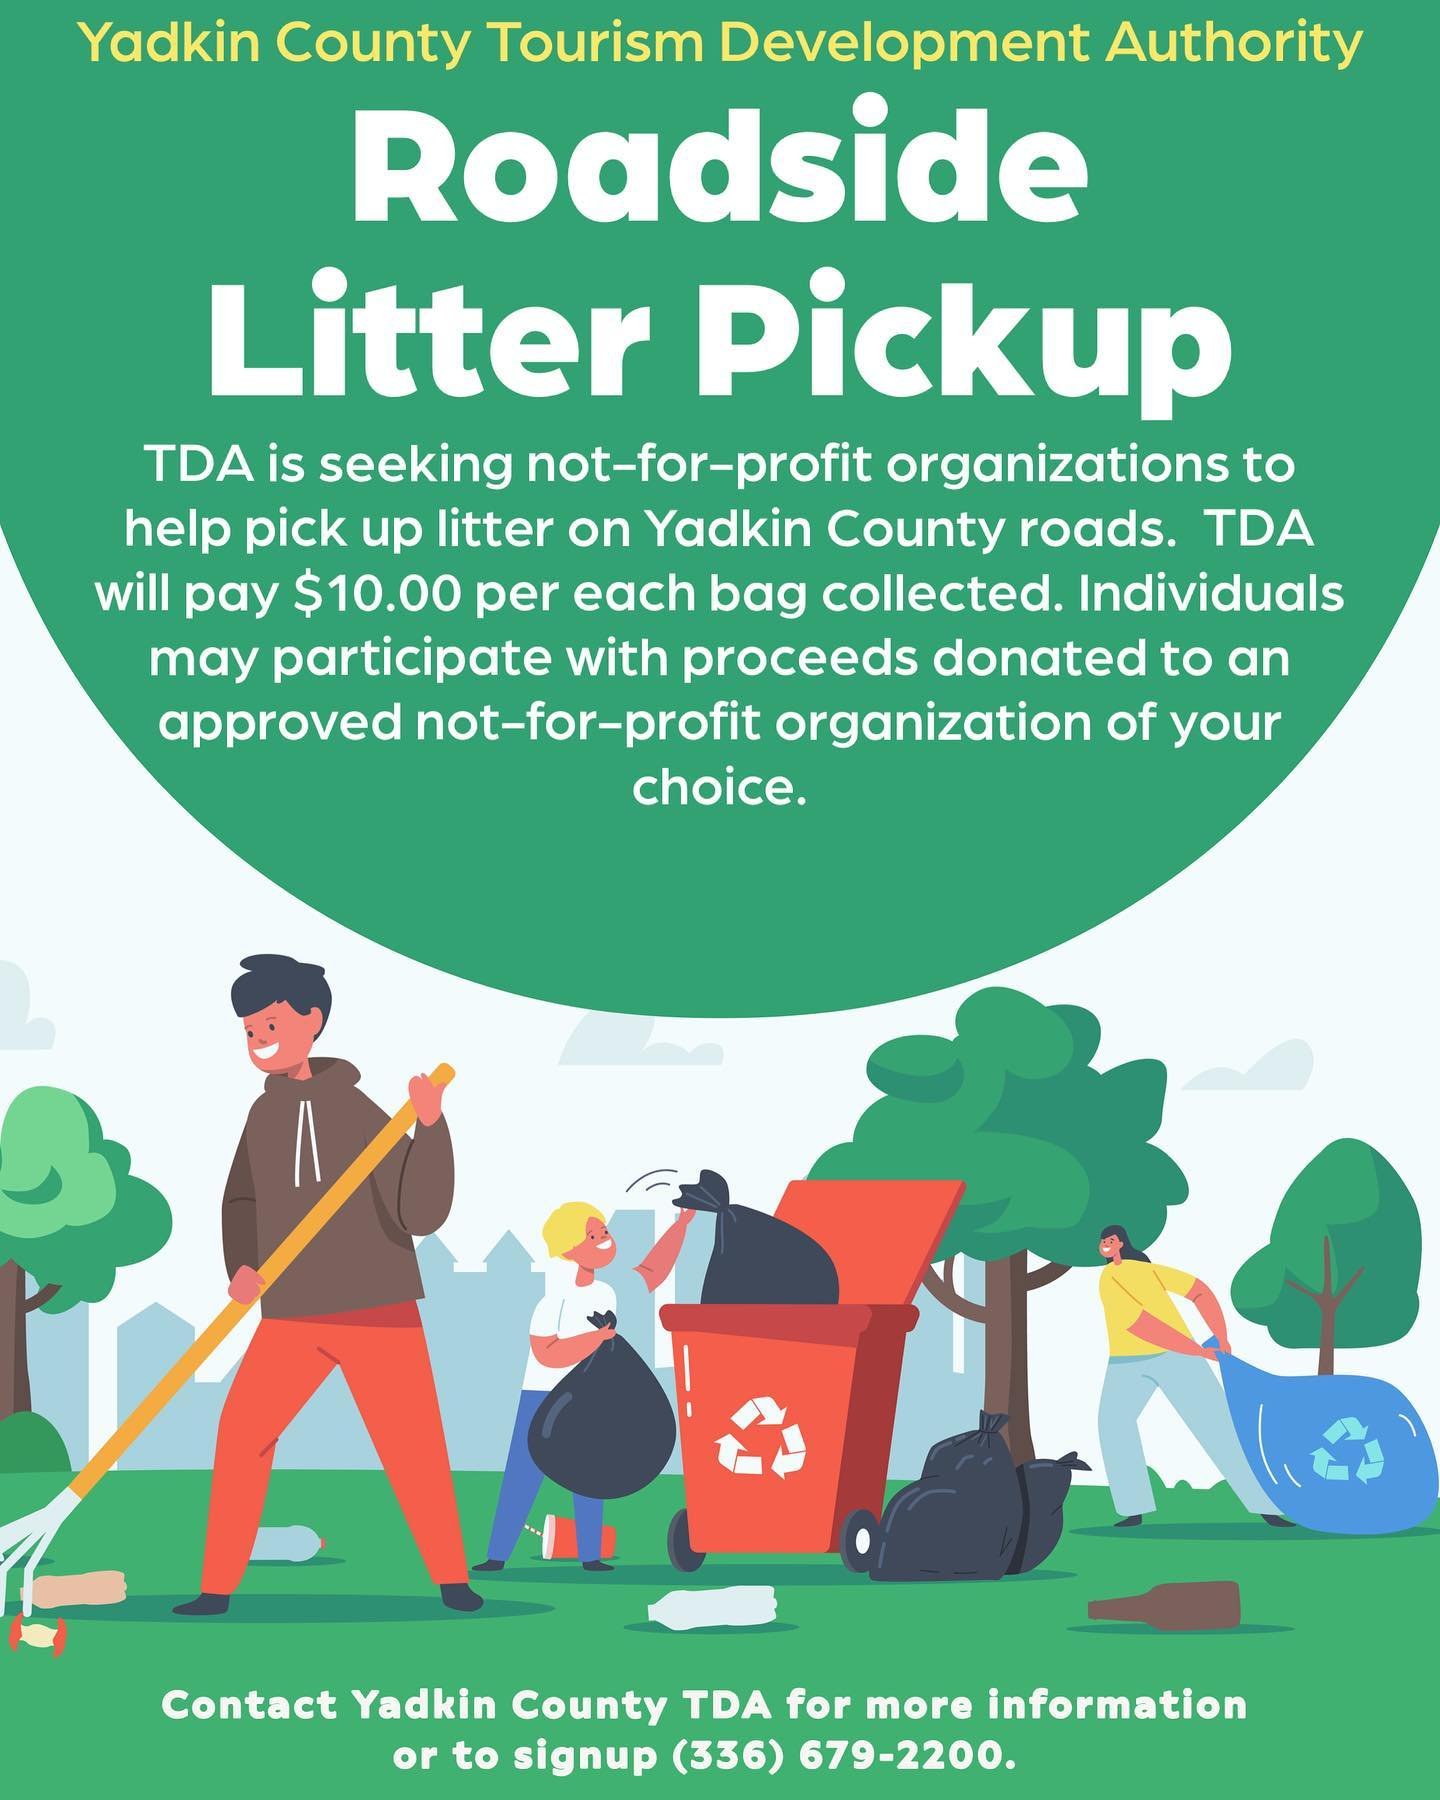 Yadkin County TDA funded roadside litter pickup operation! TDA is seeking not-for-profit organizations to help pick up litter on Yadkin County roads.  Individuals may participate with proceeds given to an approved not-for-profit organization of your 